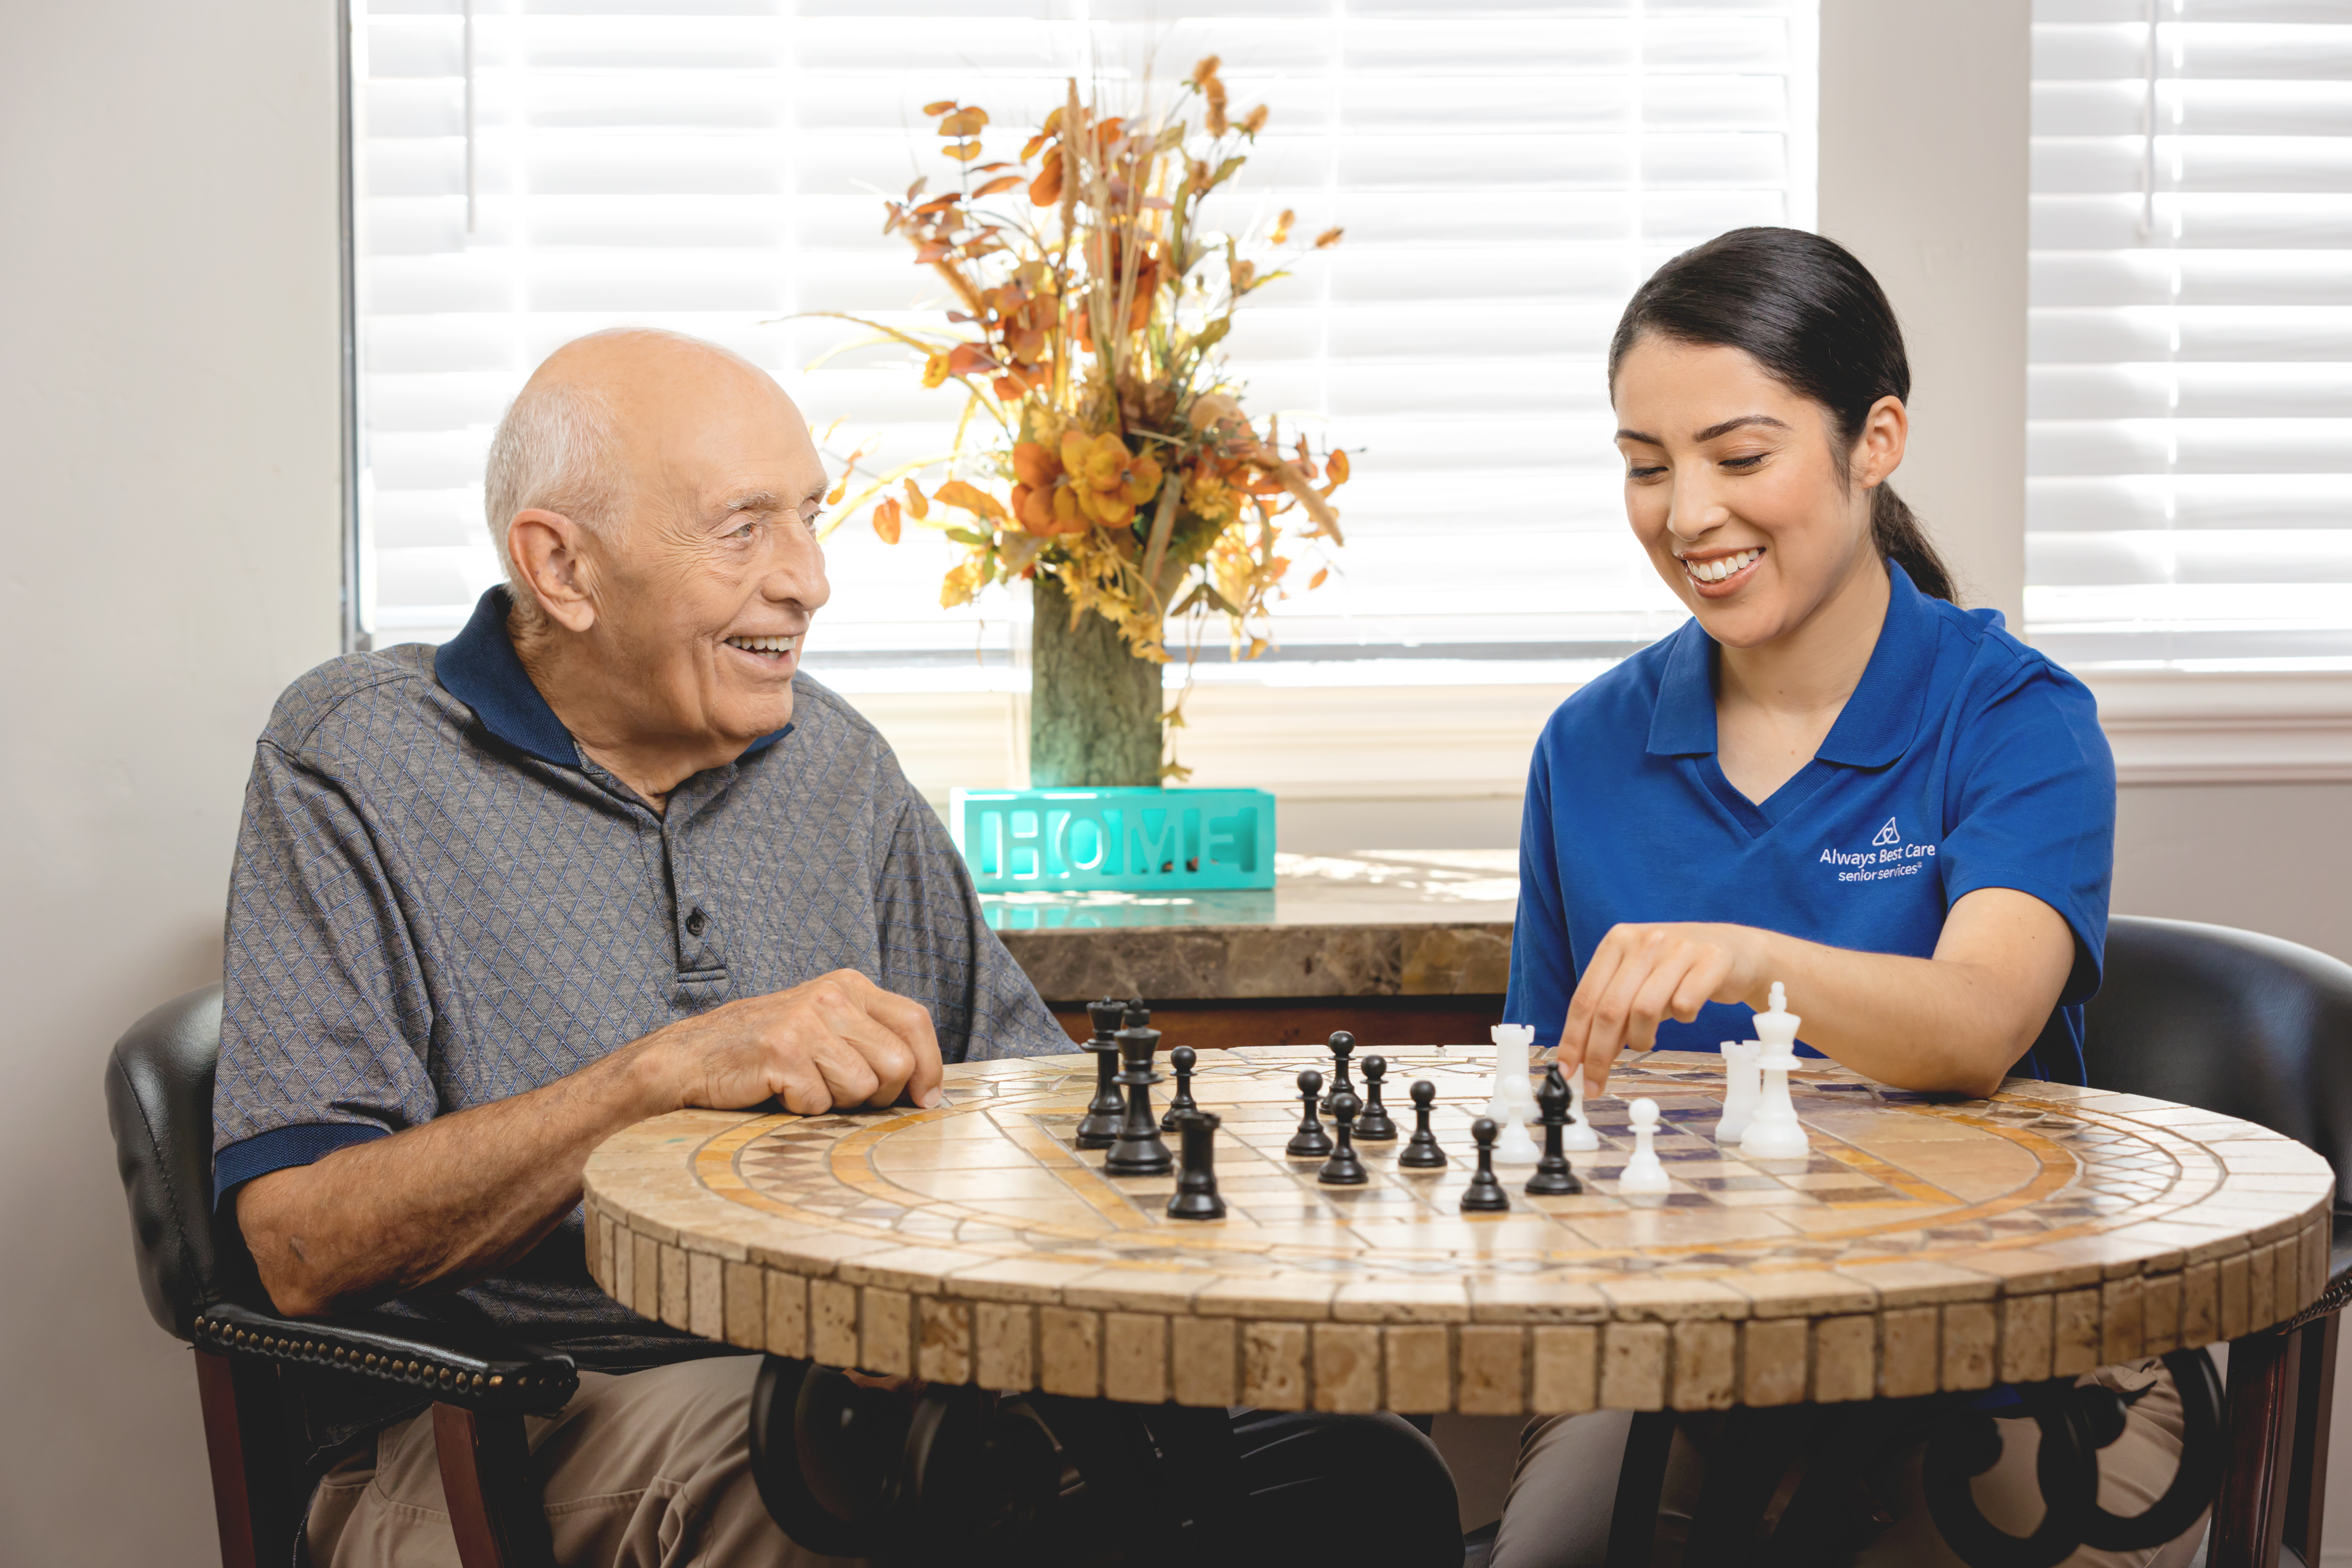 Creating a Safe Home Environment for a Loved One with Dementia